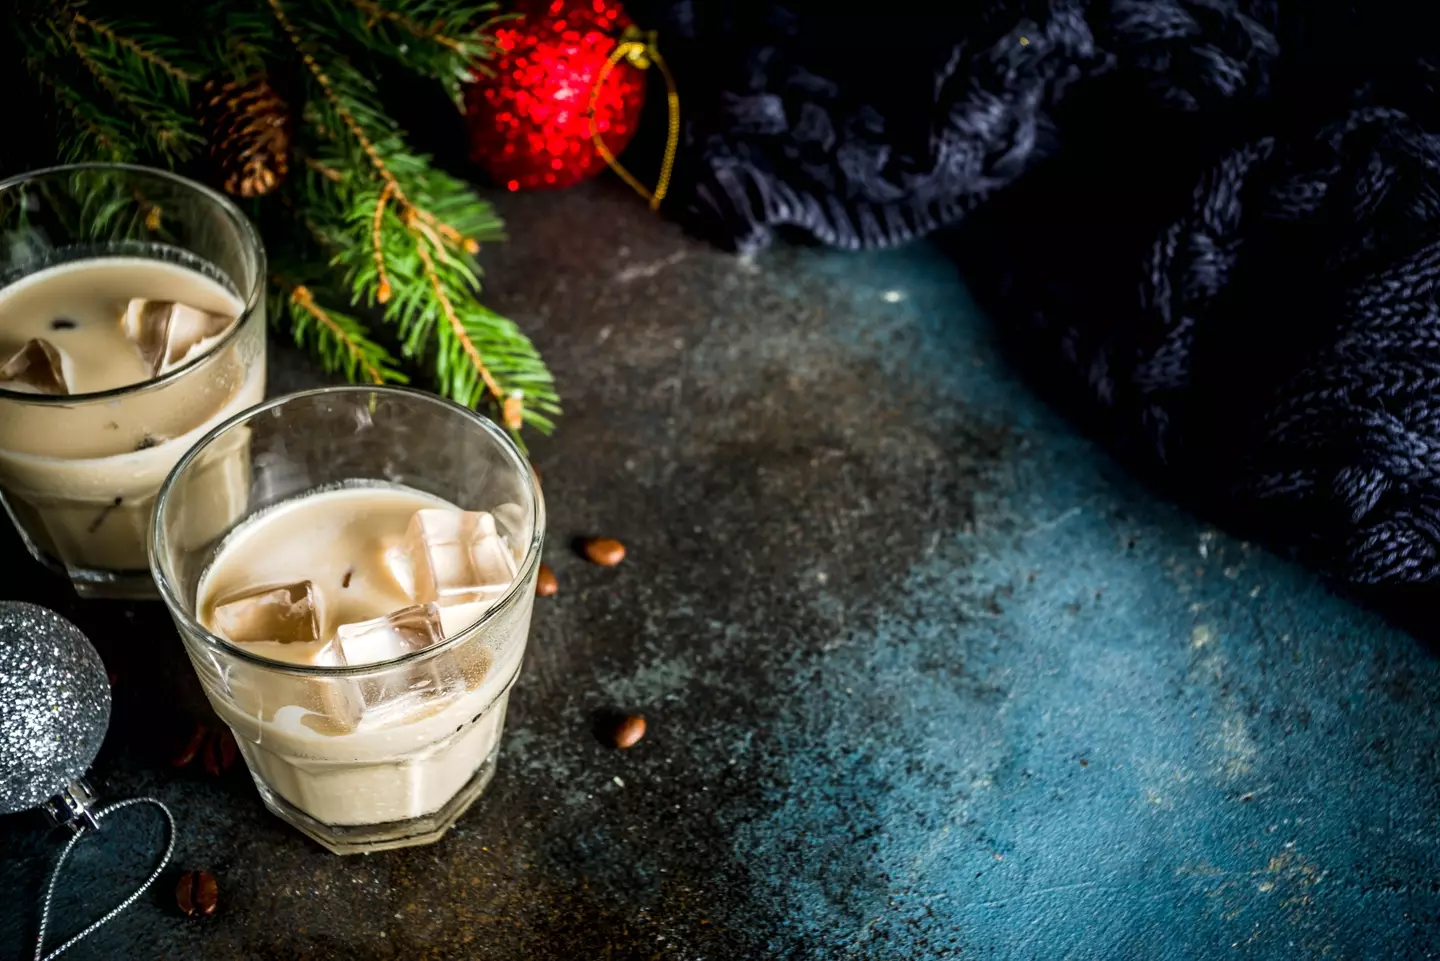 Drinking Baileys has become a pinnacle of Christmas.